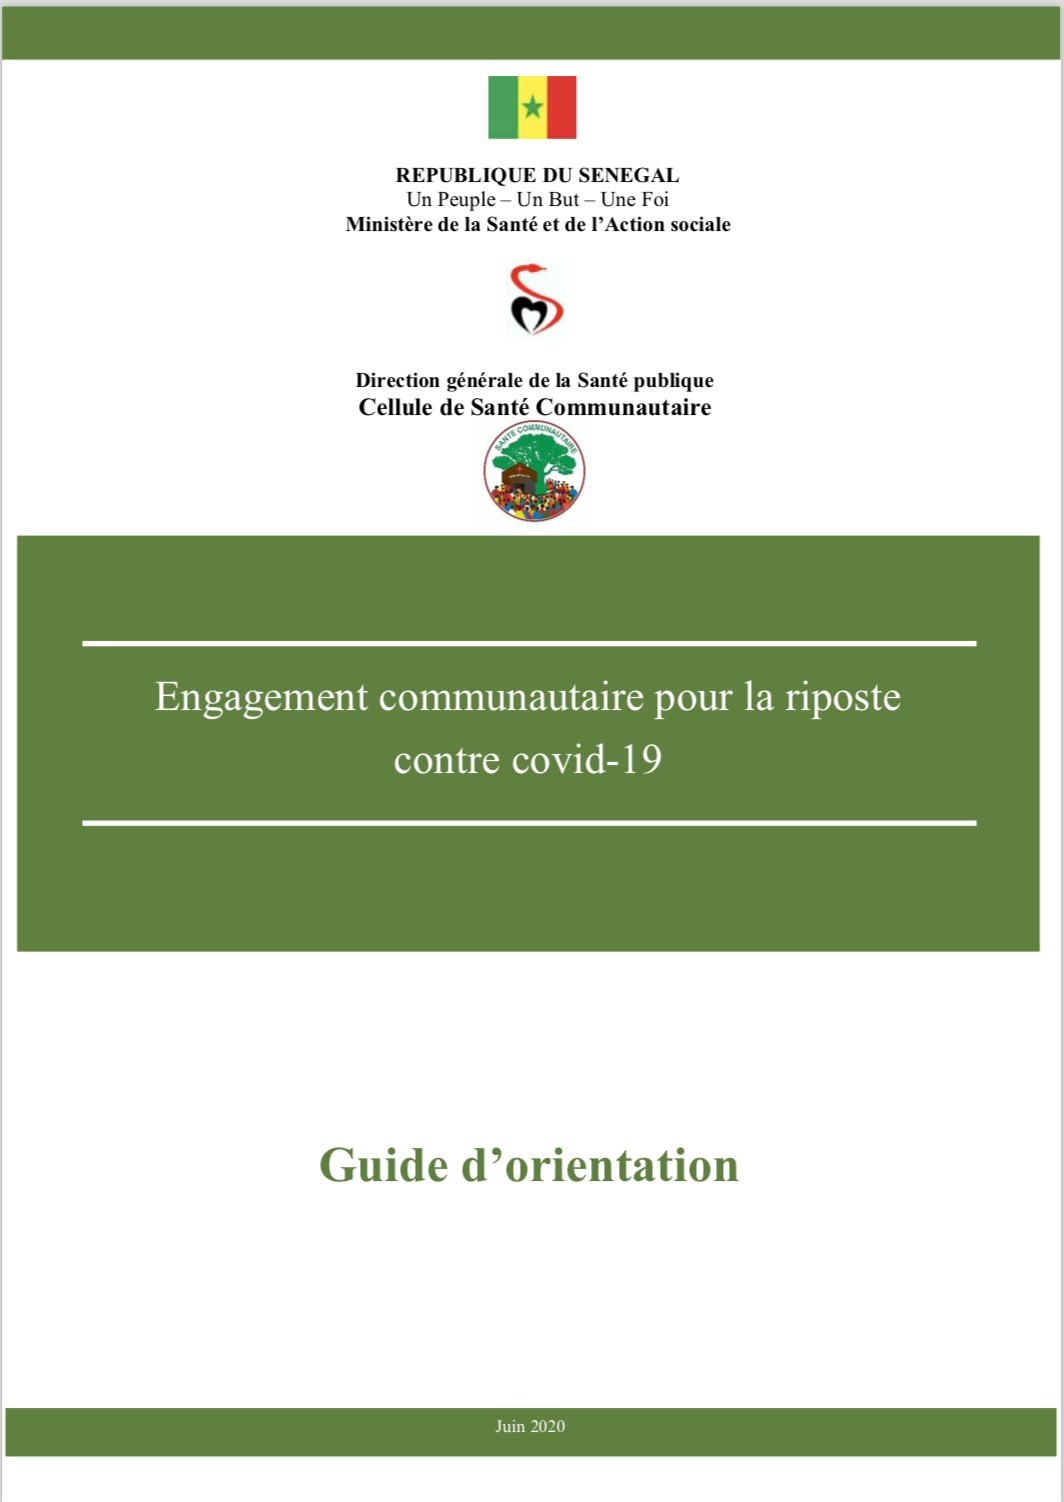 GUIDE-ORIENTATION-ENG-COMMUNAUTAIRE.png